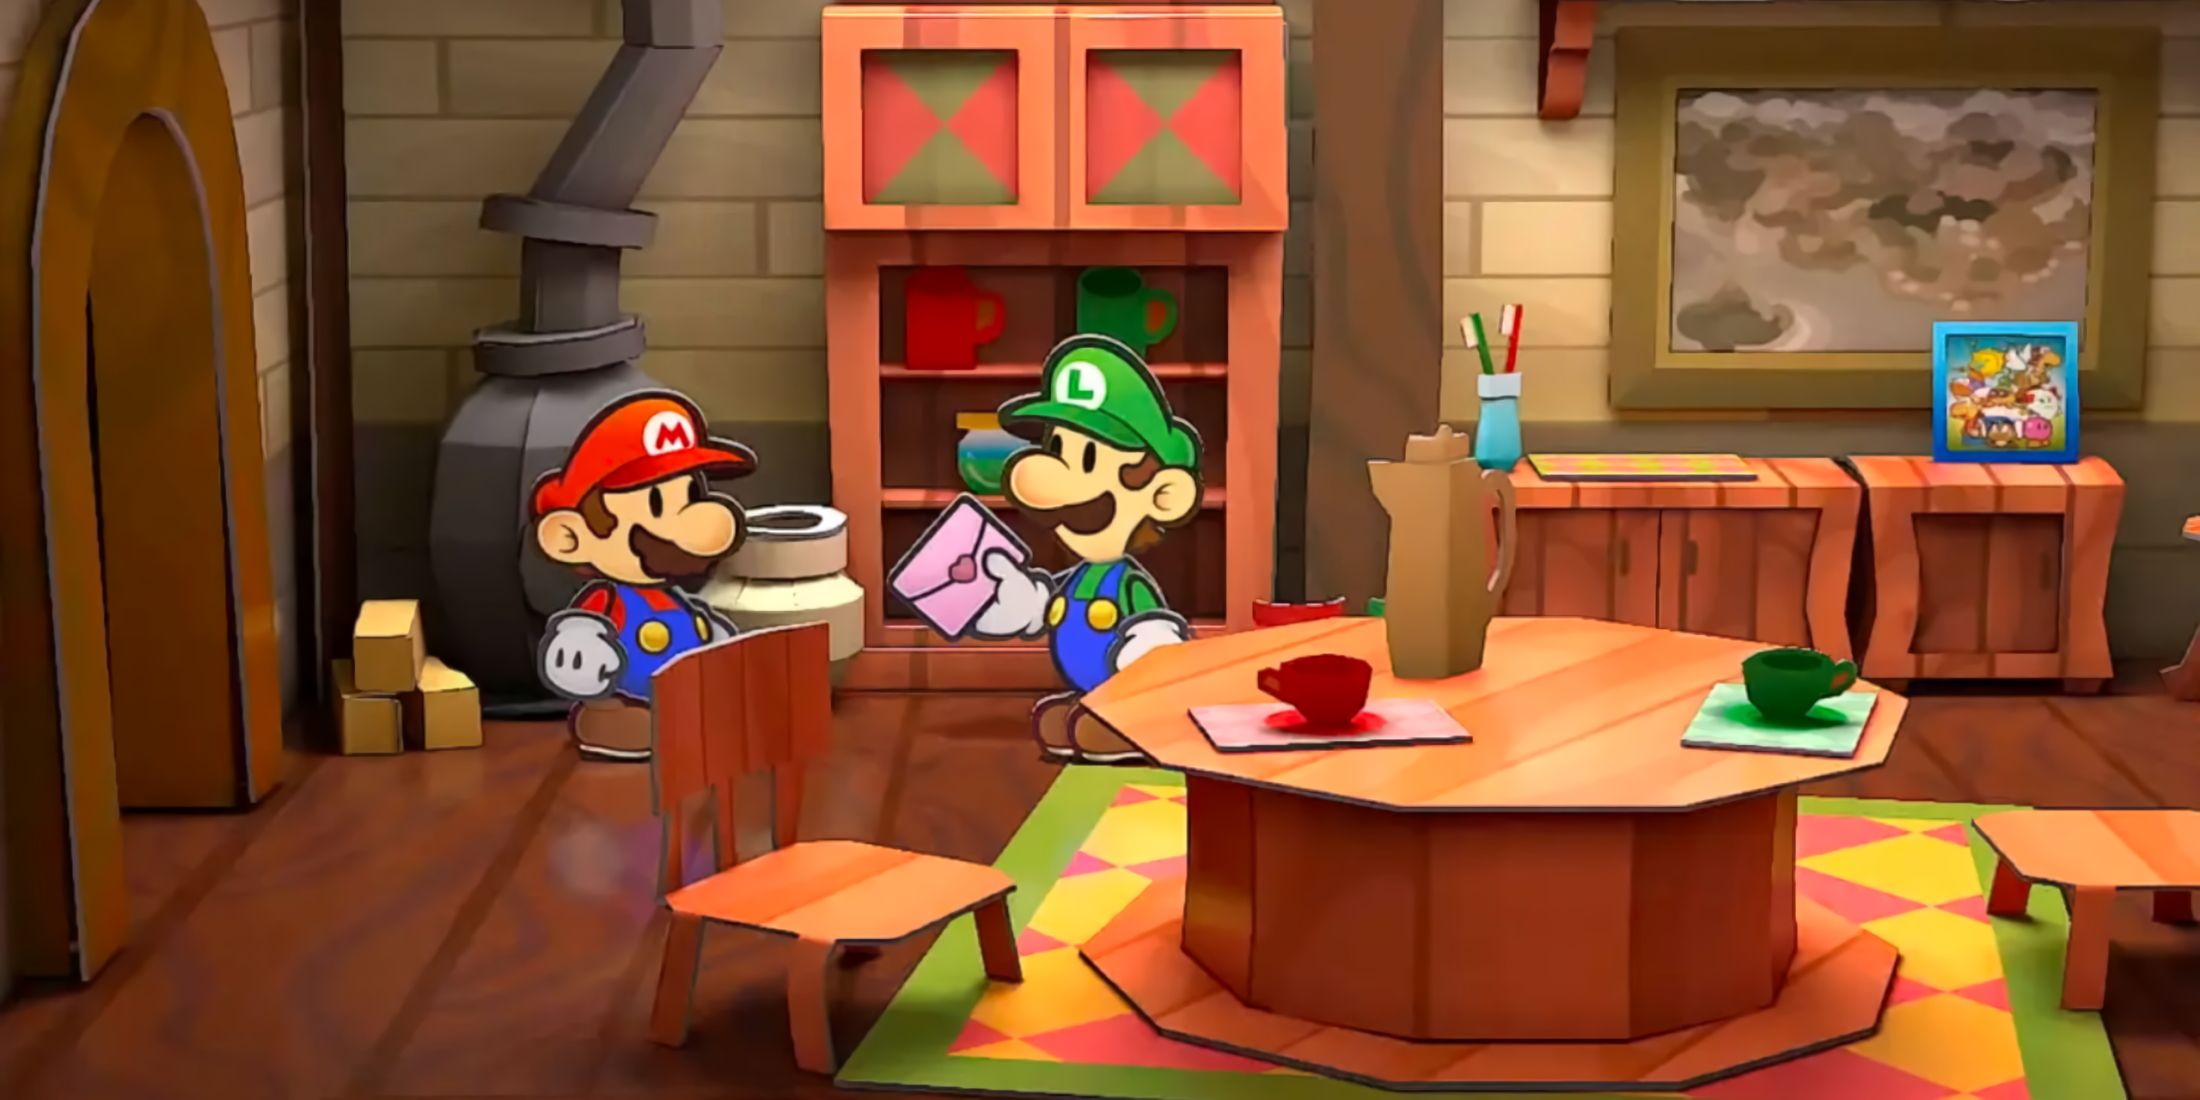 A screenshot from Paper Mario: The Thousand-Year Door showing Mario and Luigi.